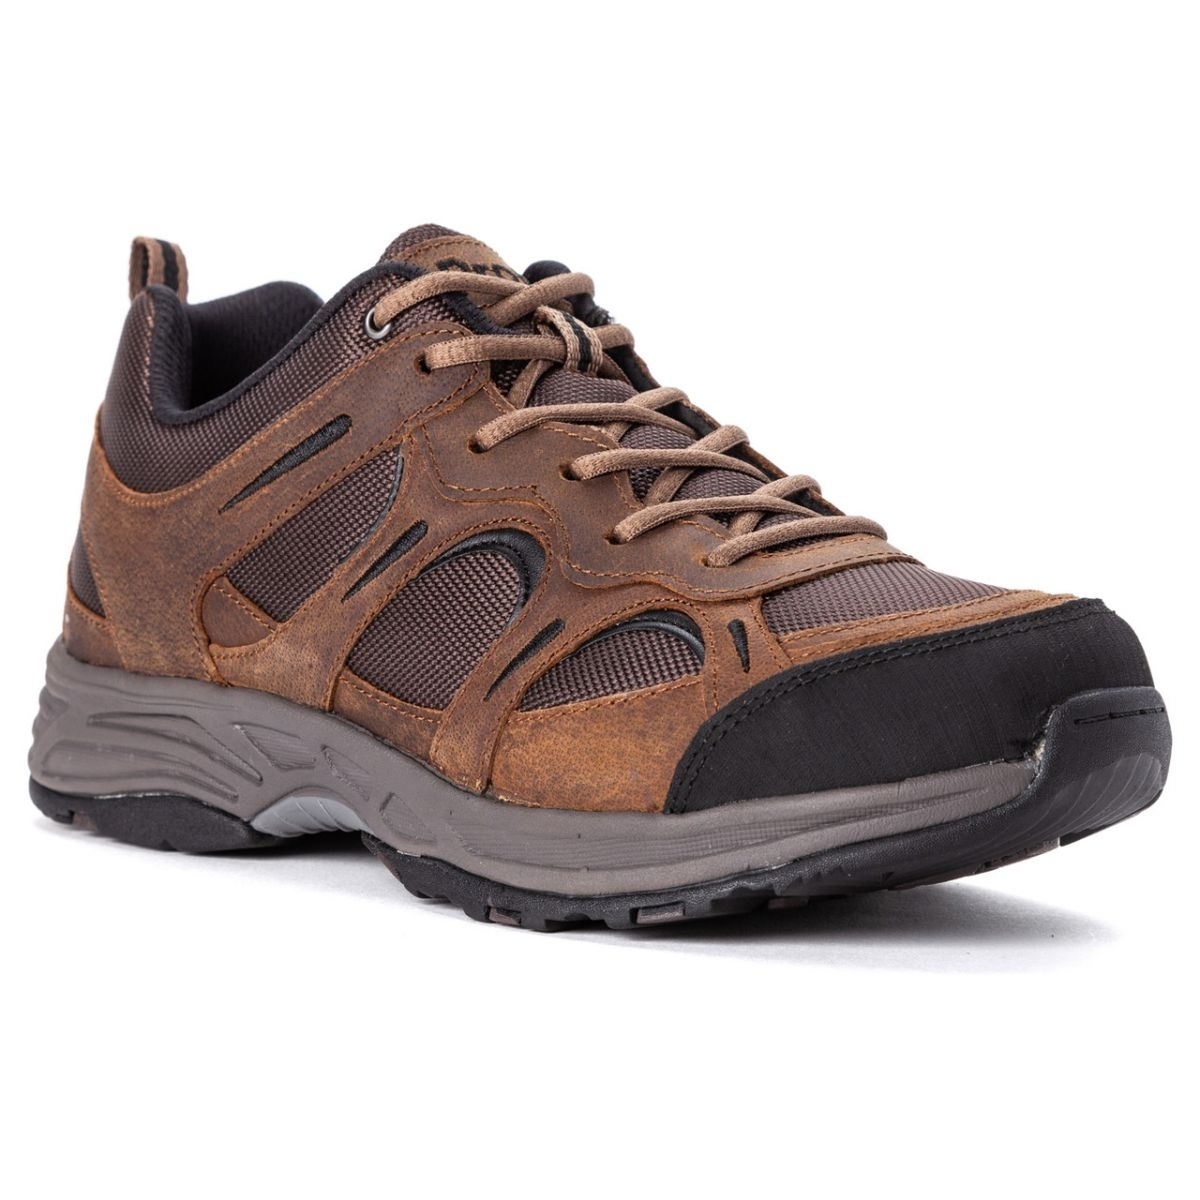 Propet Men's Connelly Hiking Shoe Brown - M5503BR BROWN - BROWN, 9-3E